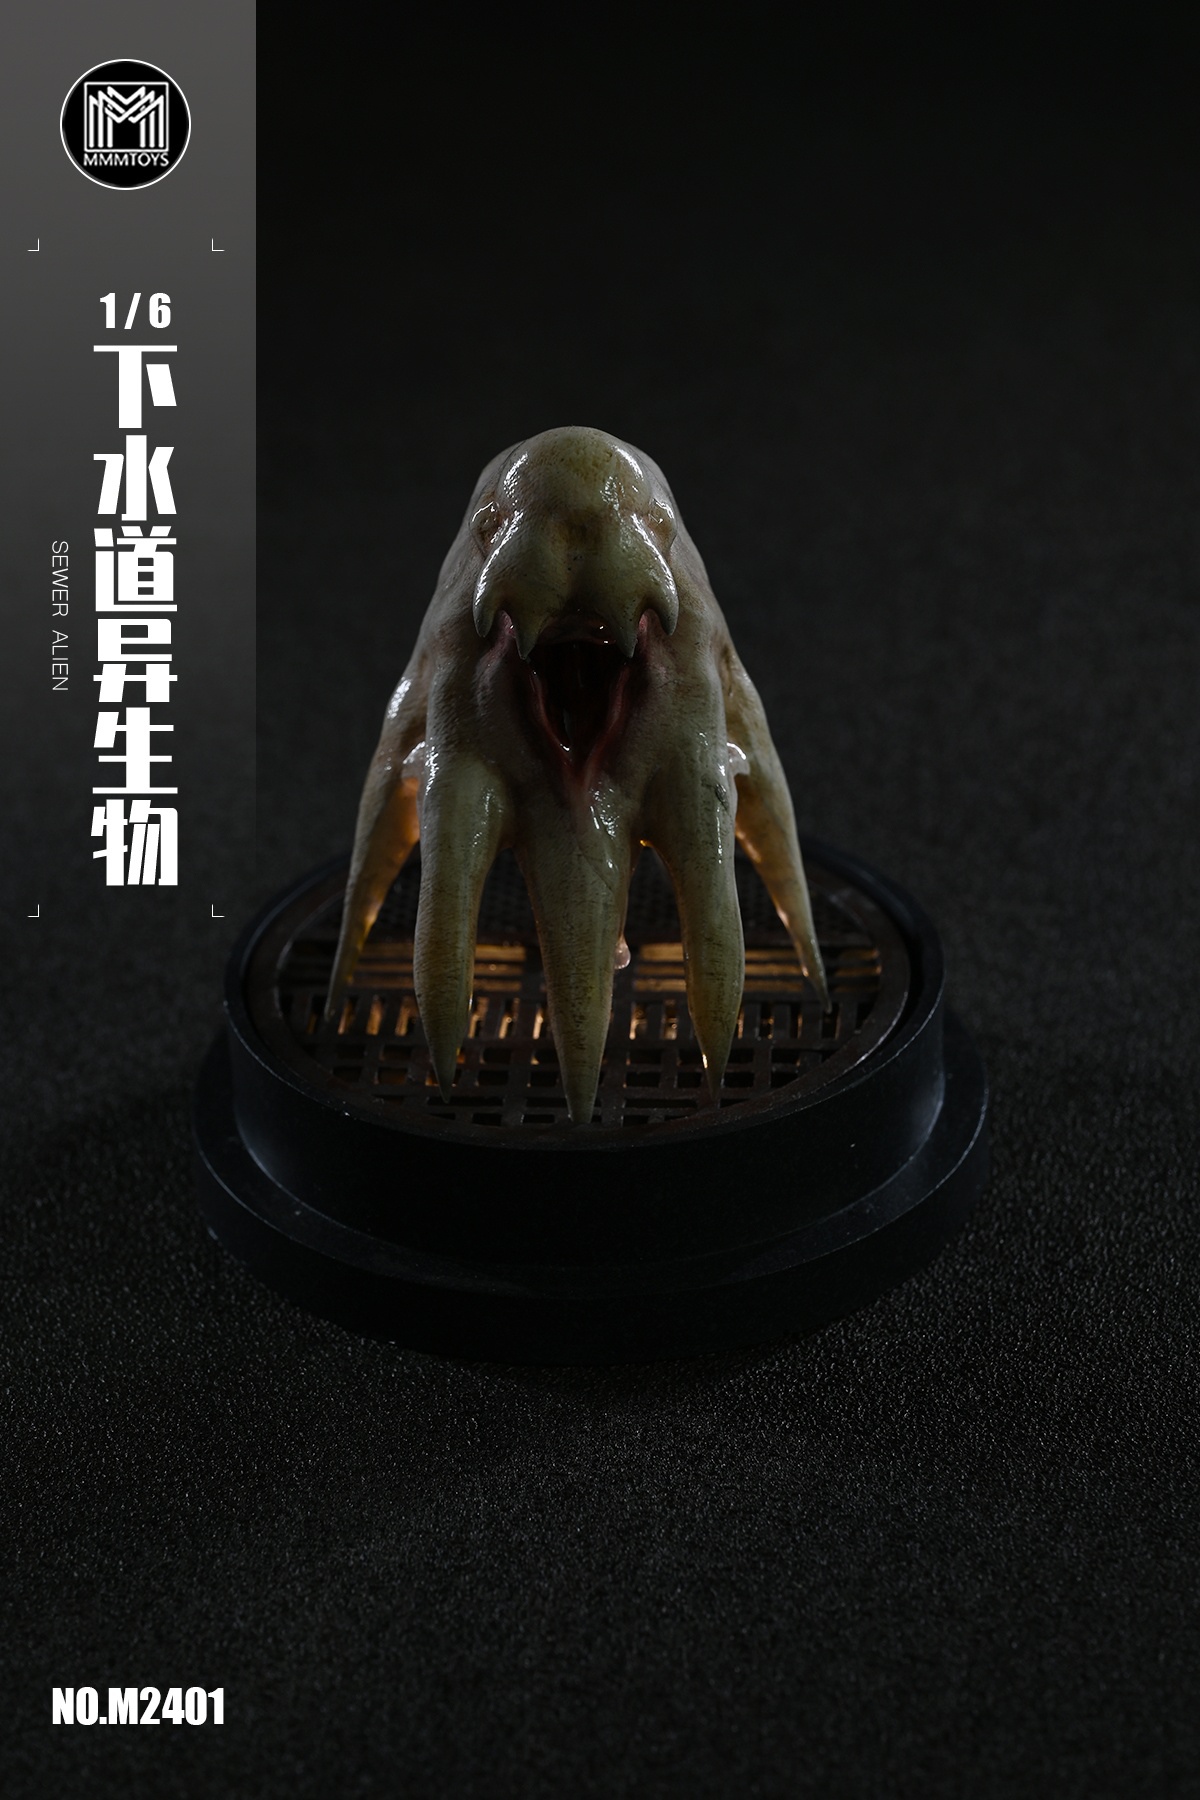 NEW PRODUCT: MMMTOYS - Sewer Alien (M2401) 09165